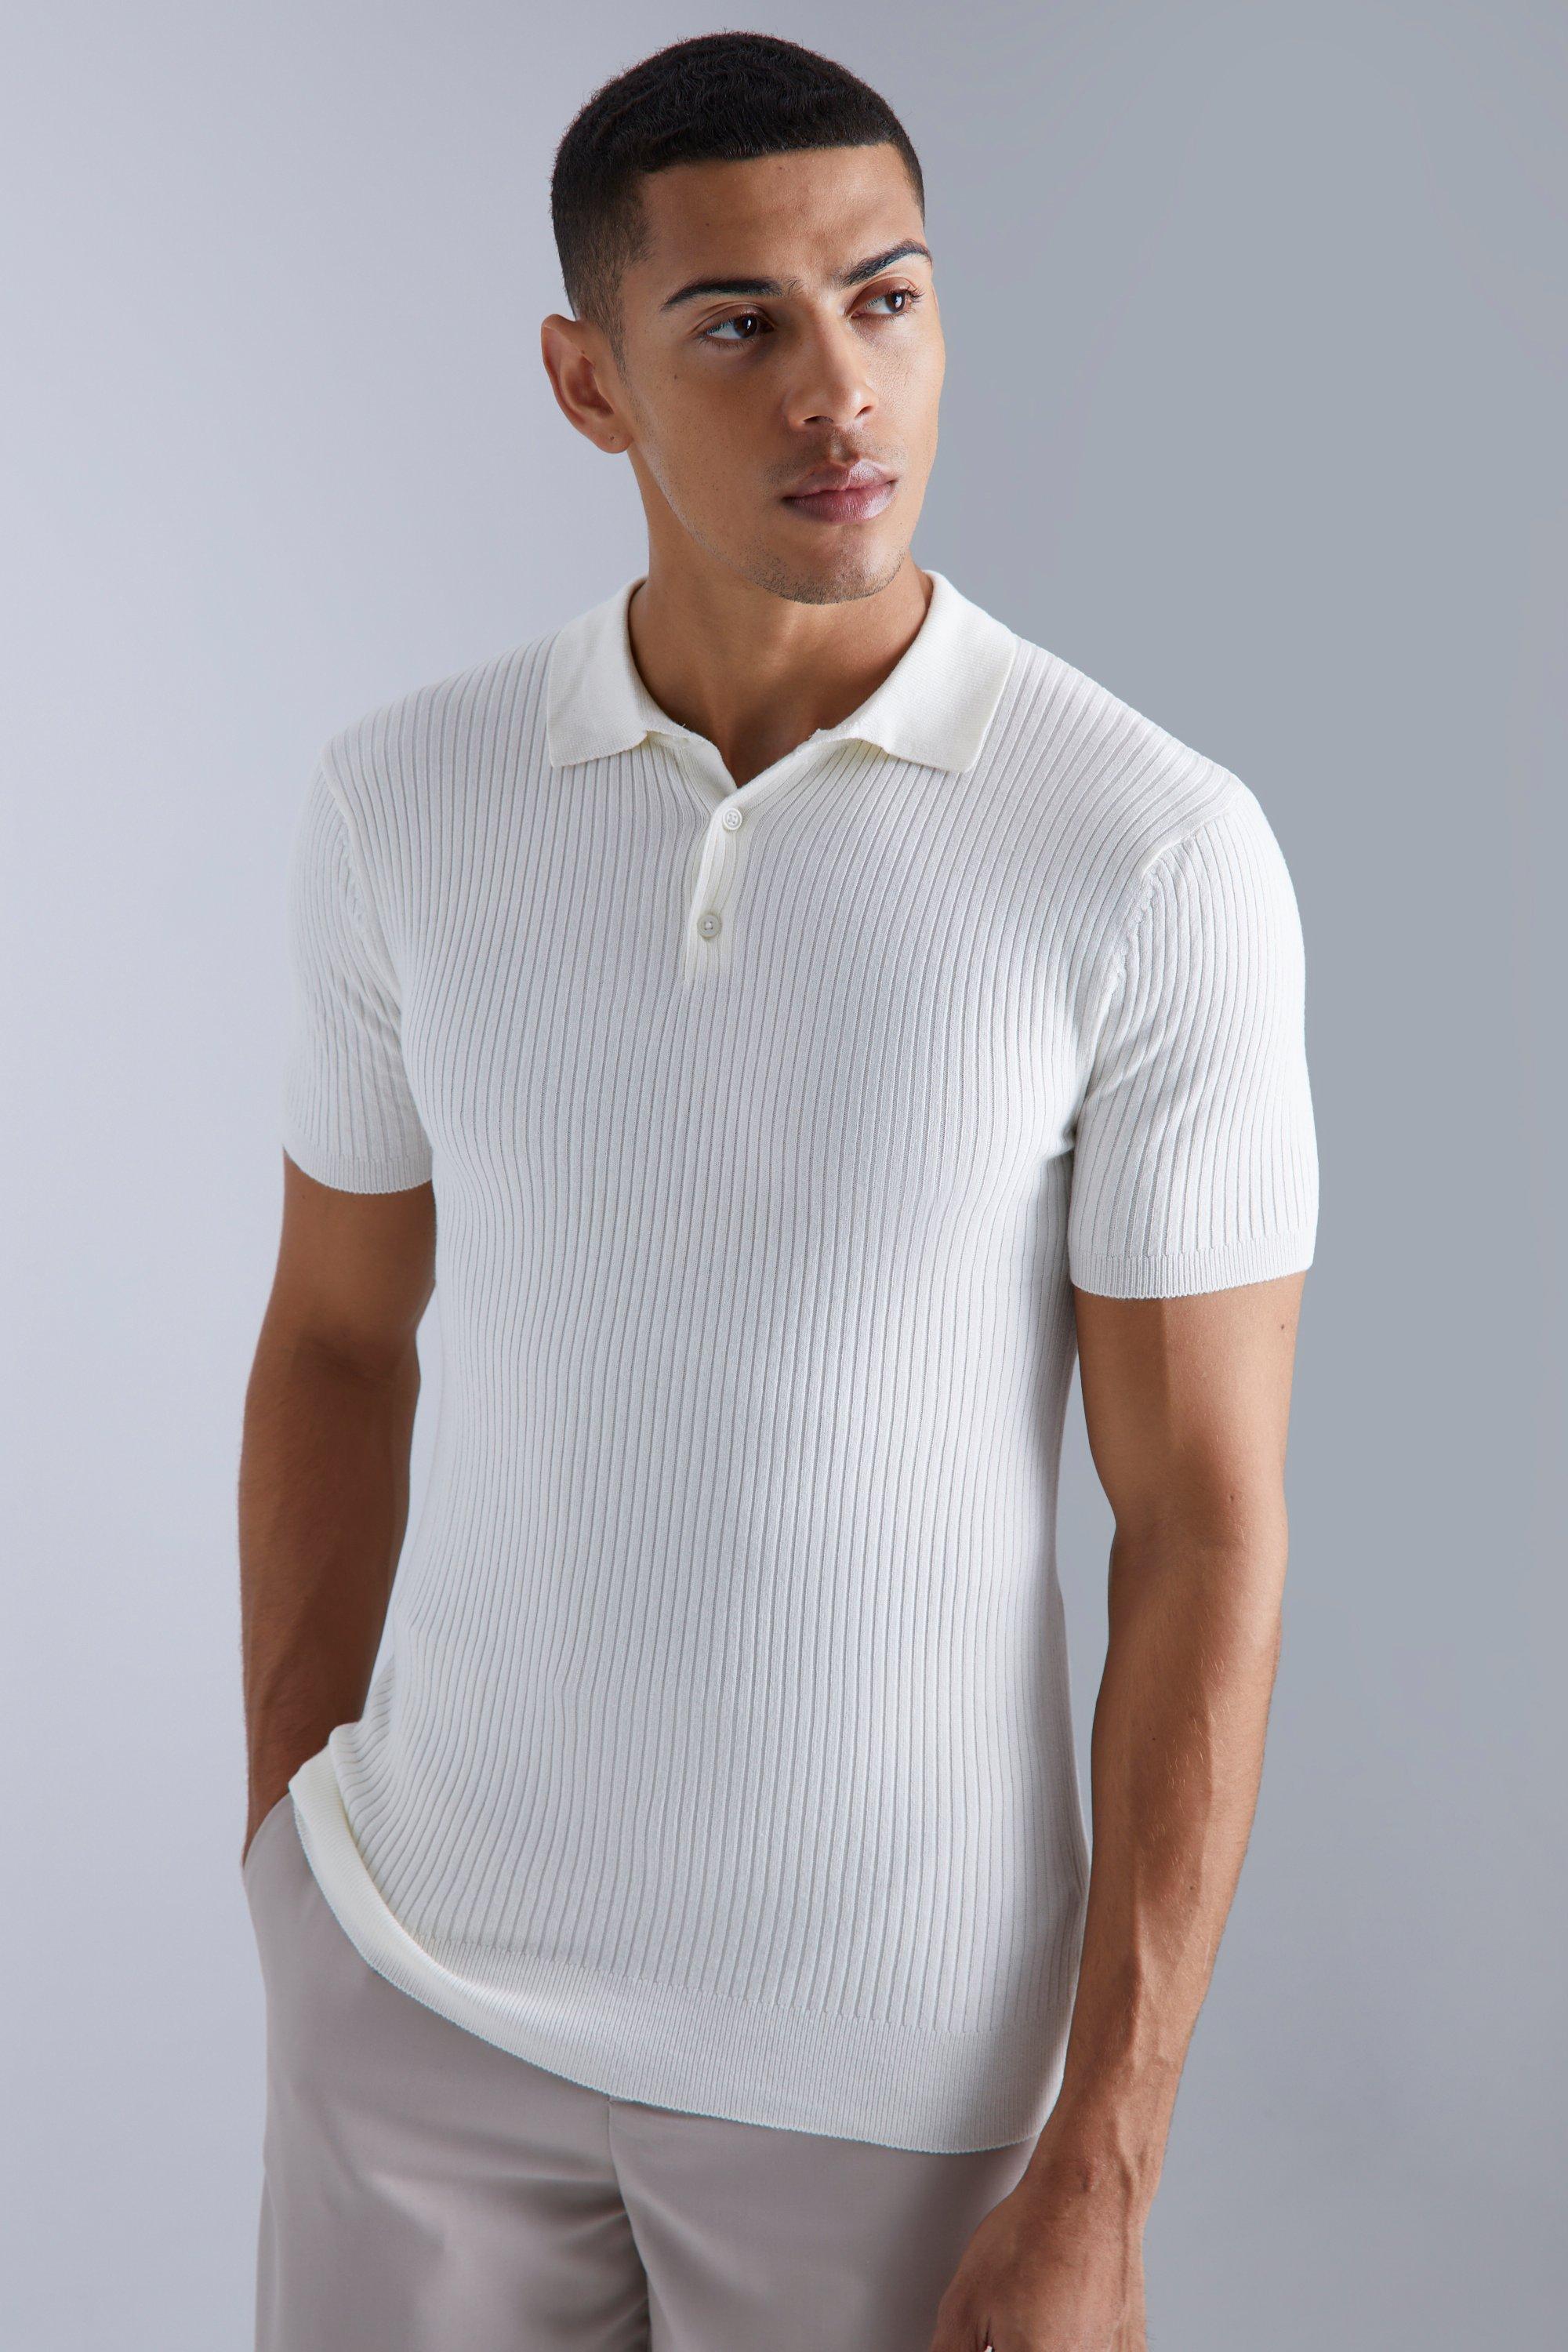 Men's Muscle Short Sleeve Ribbed Polo - White - S, White